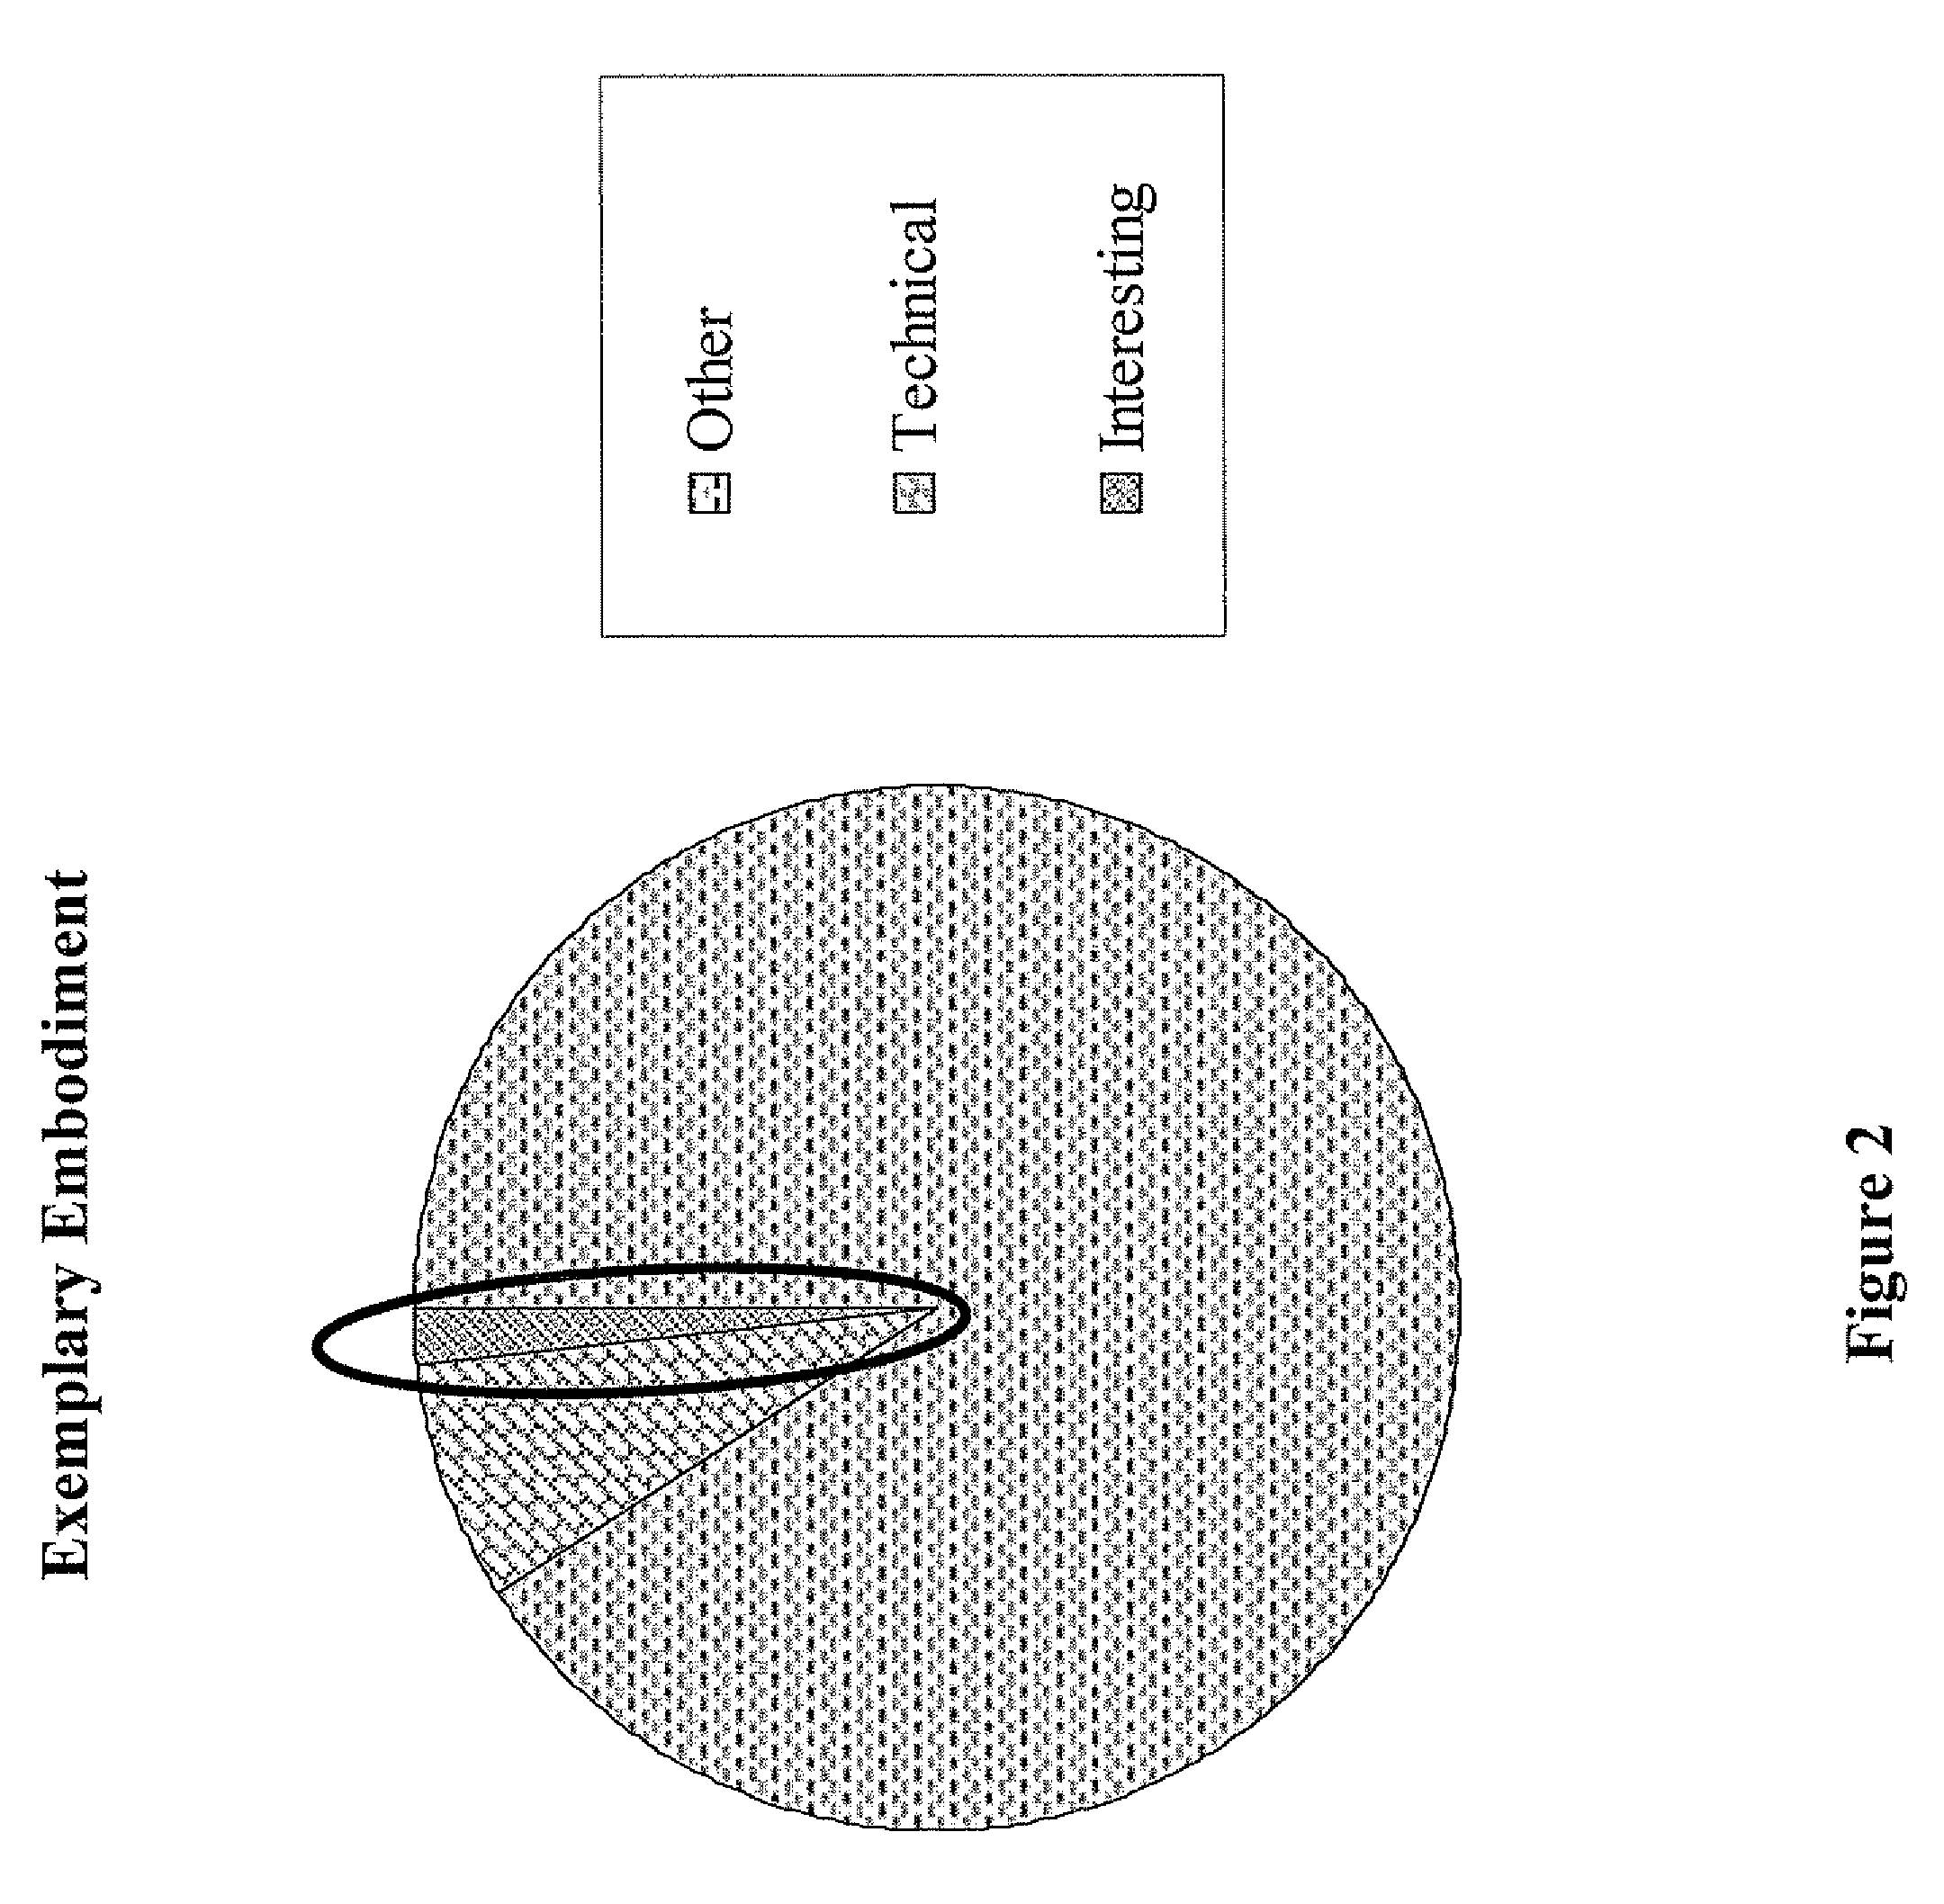 Methods for user profiling for detecting insider threats based on internet search patterns and forensics of search keywords